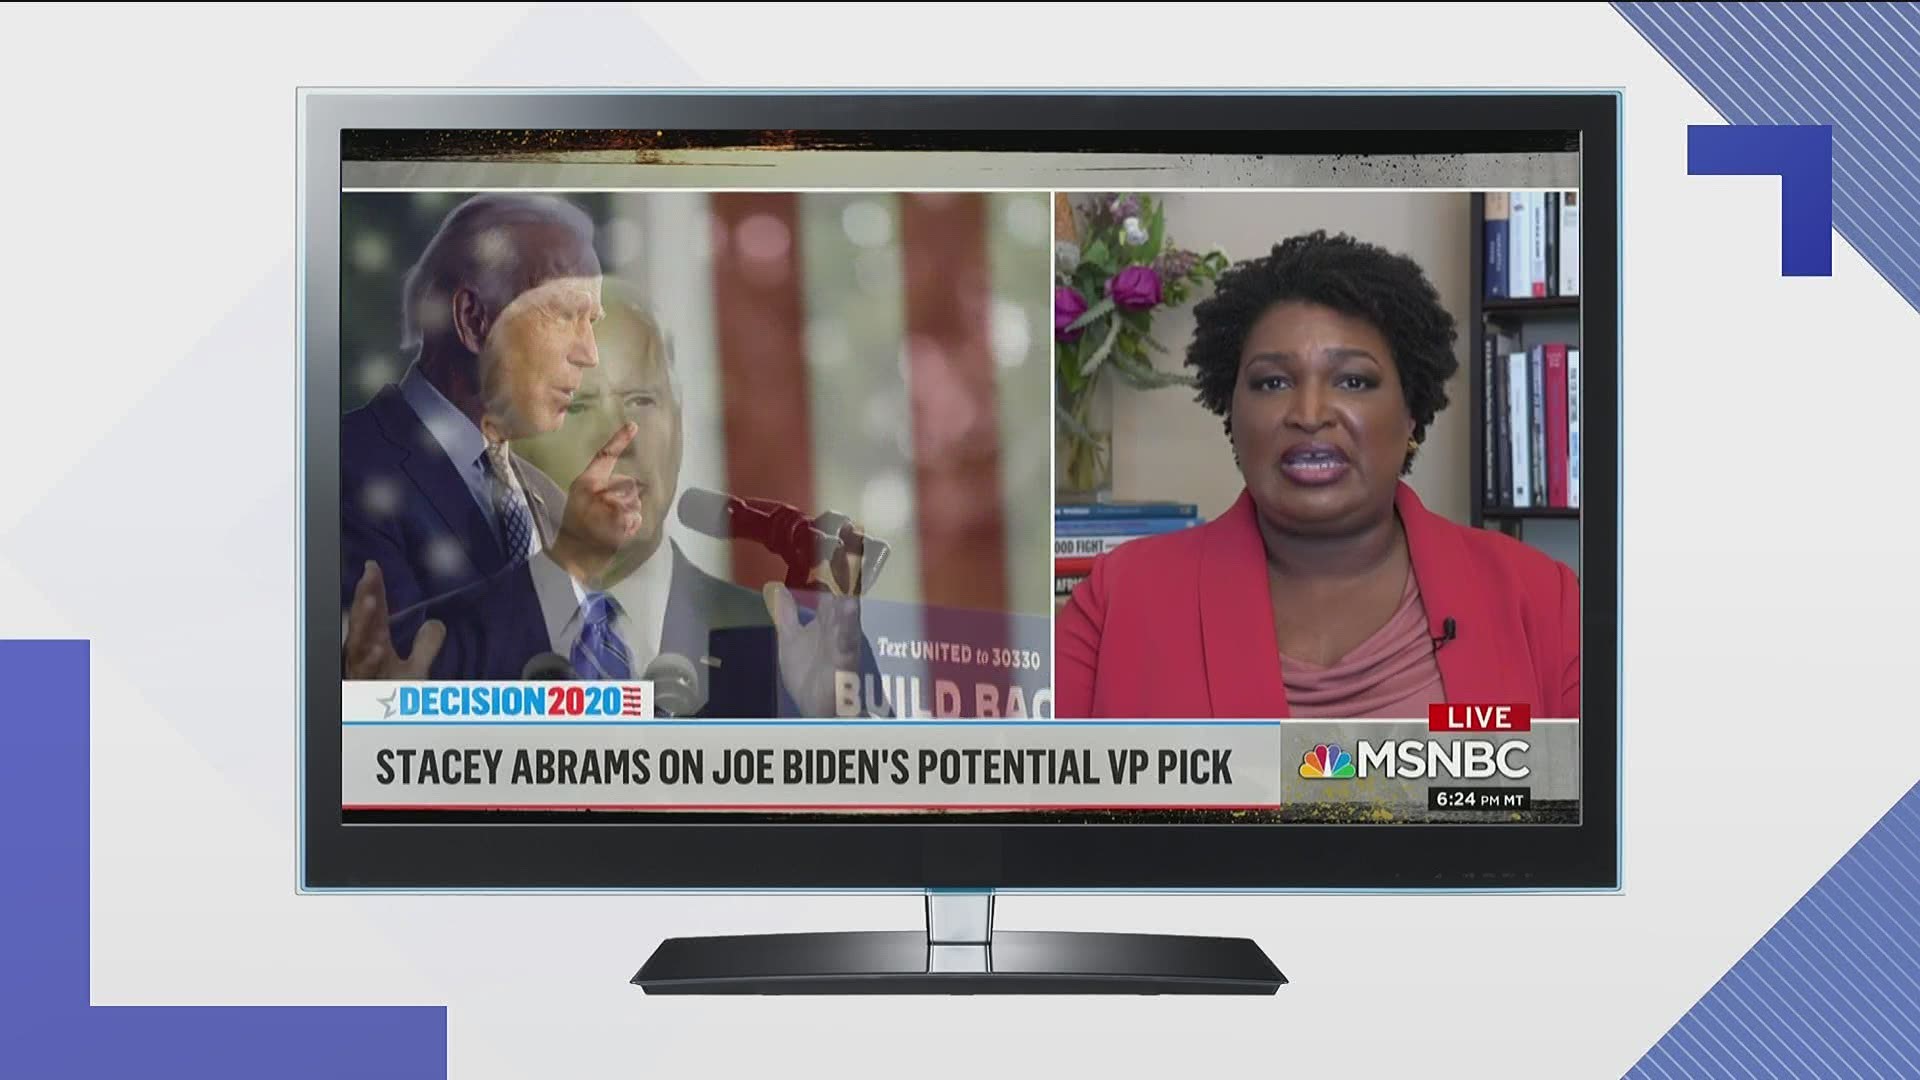 Neither Stacey Abrams nor Keisha Lance Bottoms made mention of whether they believed they were frontrunners in recent interviews, though their names have come up.